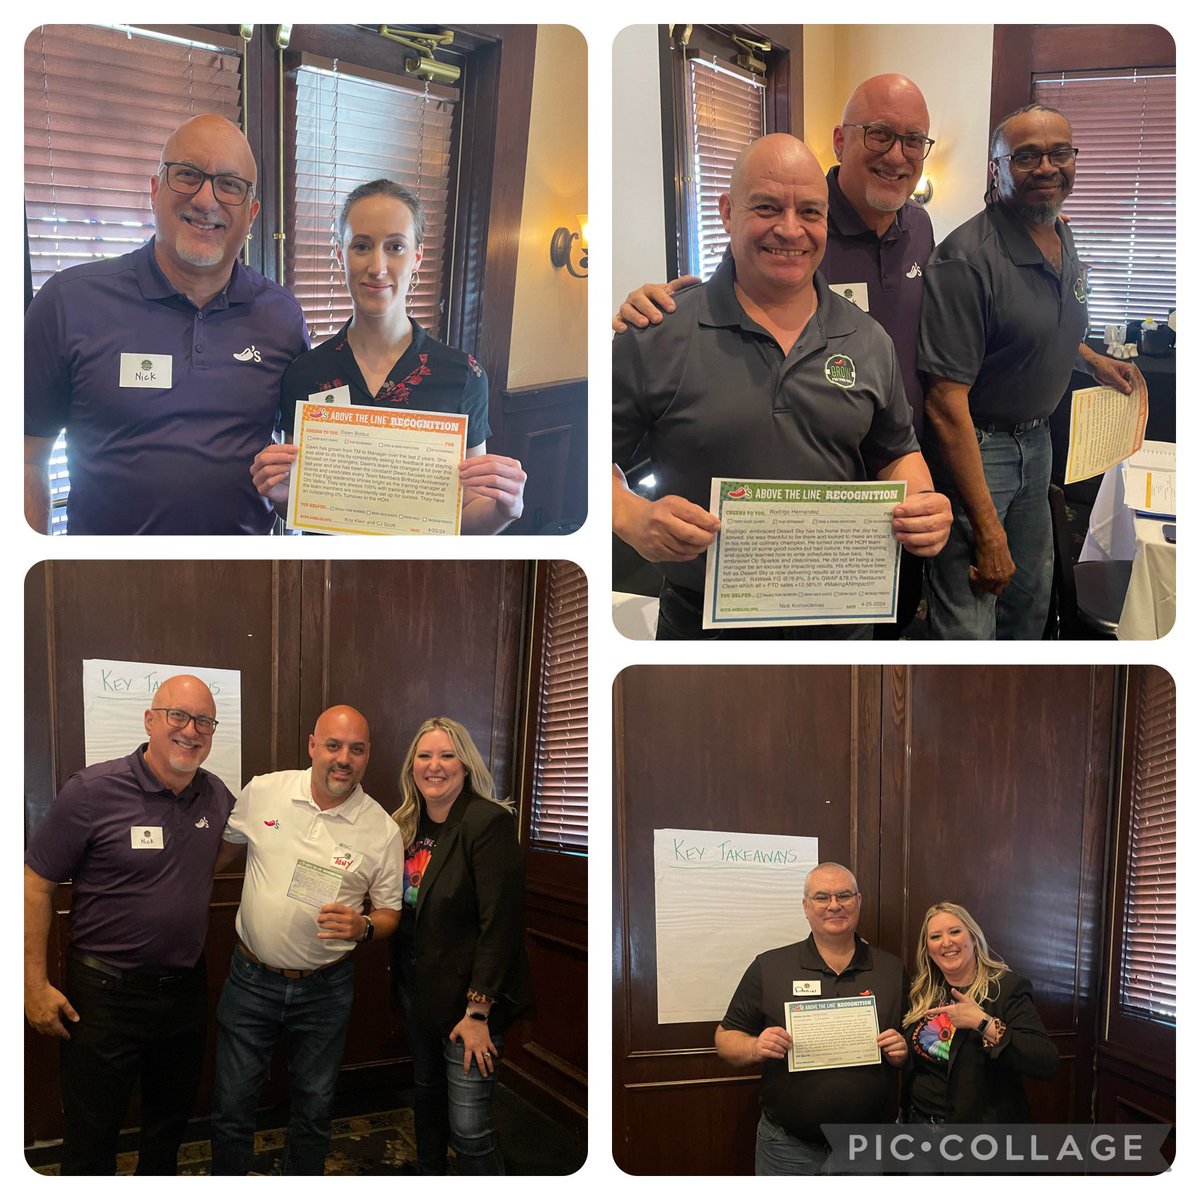 There’s always time for recognition, we never sit on ATLs! #ChilisLLD kickoff with AZ & NV leaders was a day full of development, vulnerability, & relationship building. I look forward to more time with these amazing #MountainRegion leaders! 🌶️💚⛰️🌻 @hasquet @train3rgirl